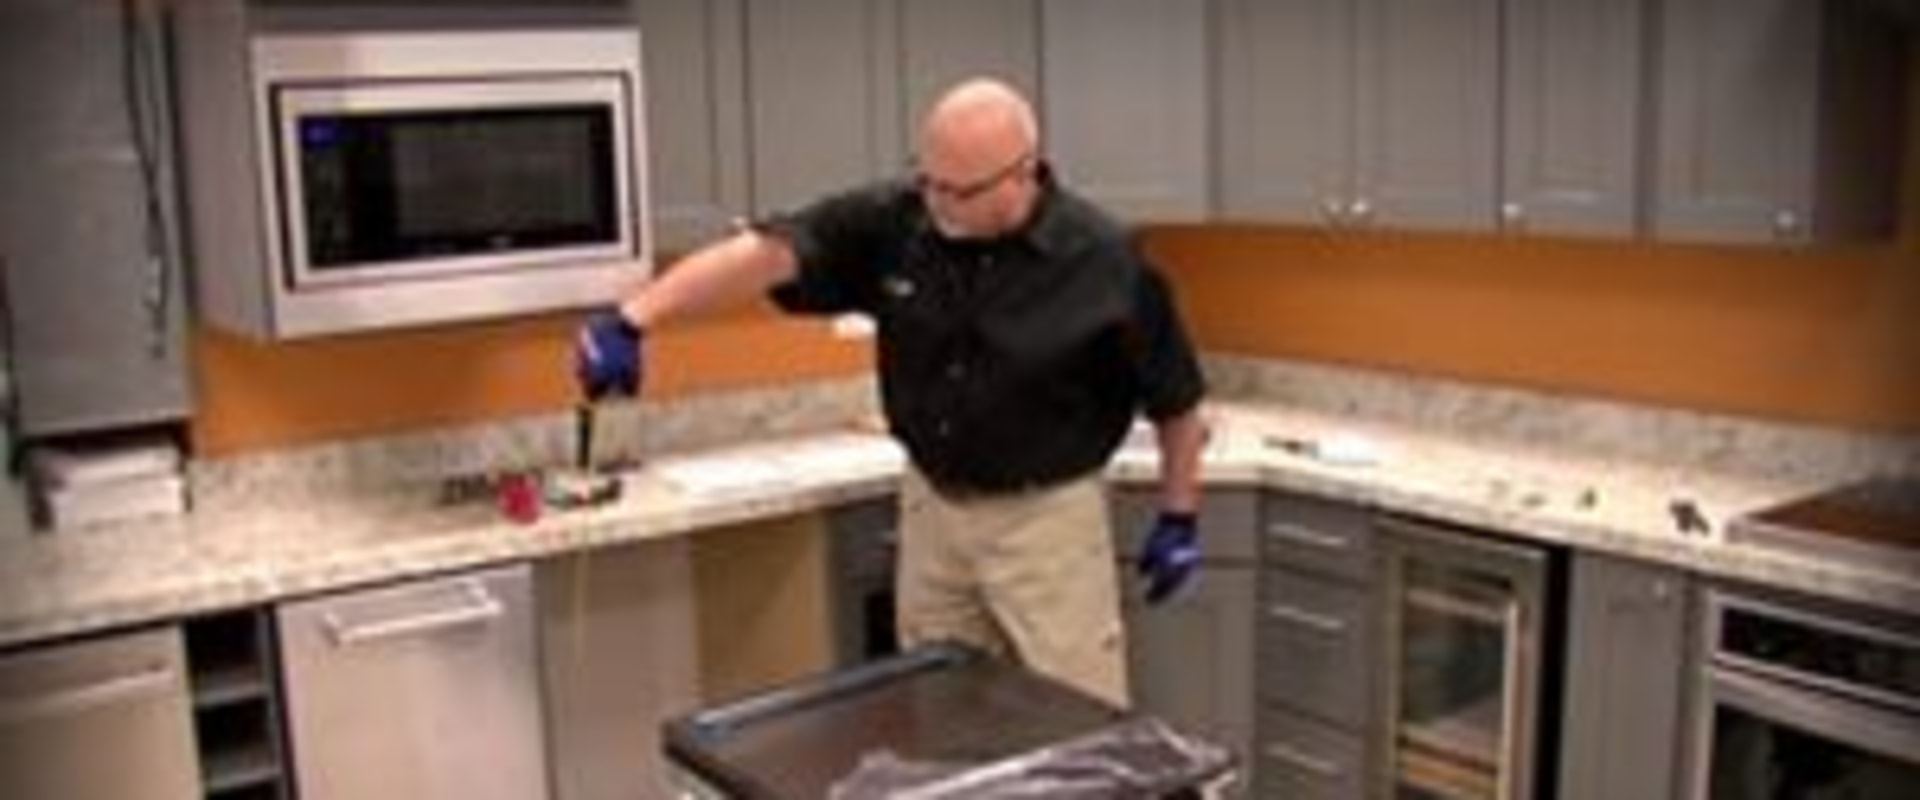 Installing a Dishwasher: Step-by-Step Guide